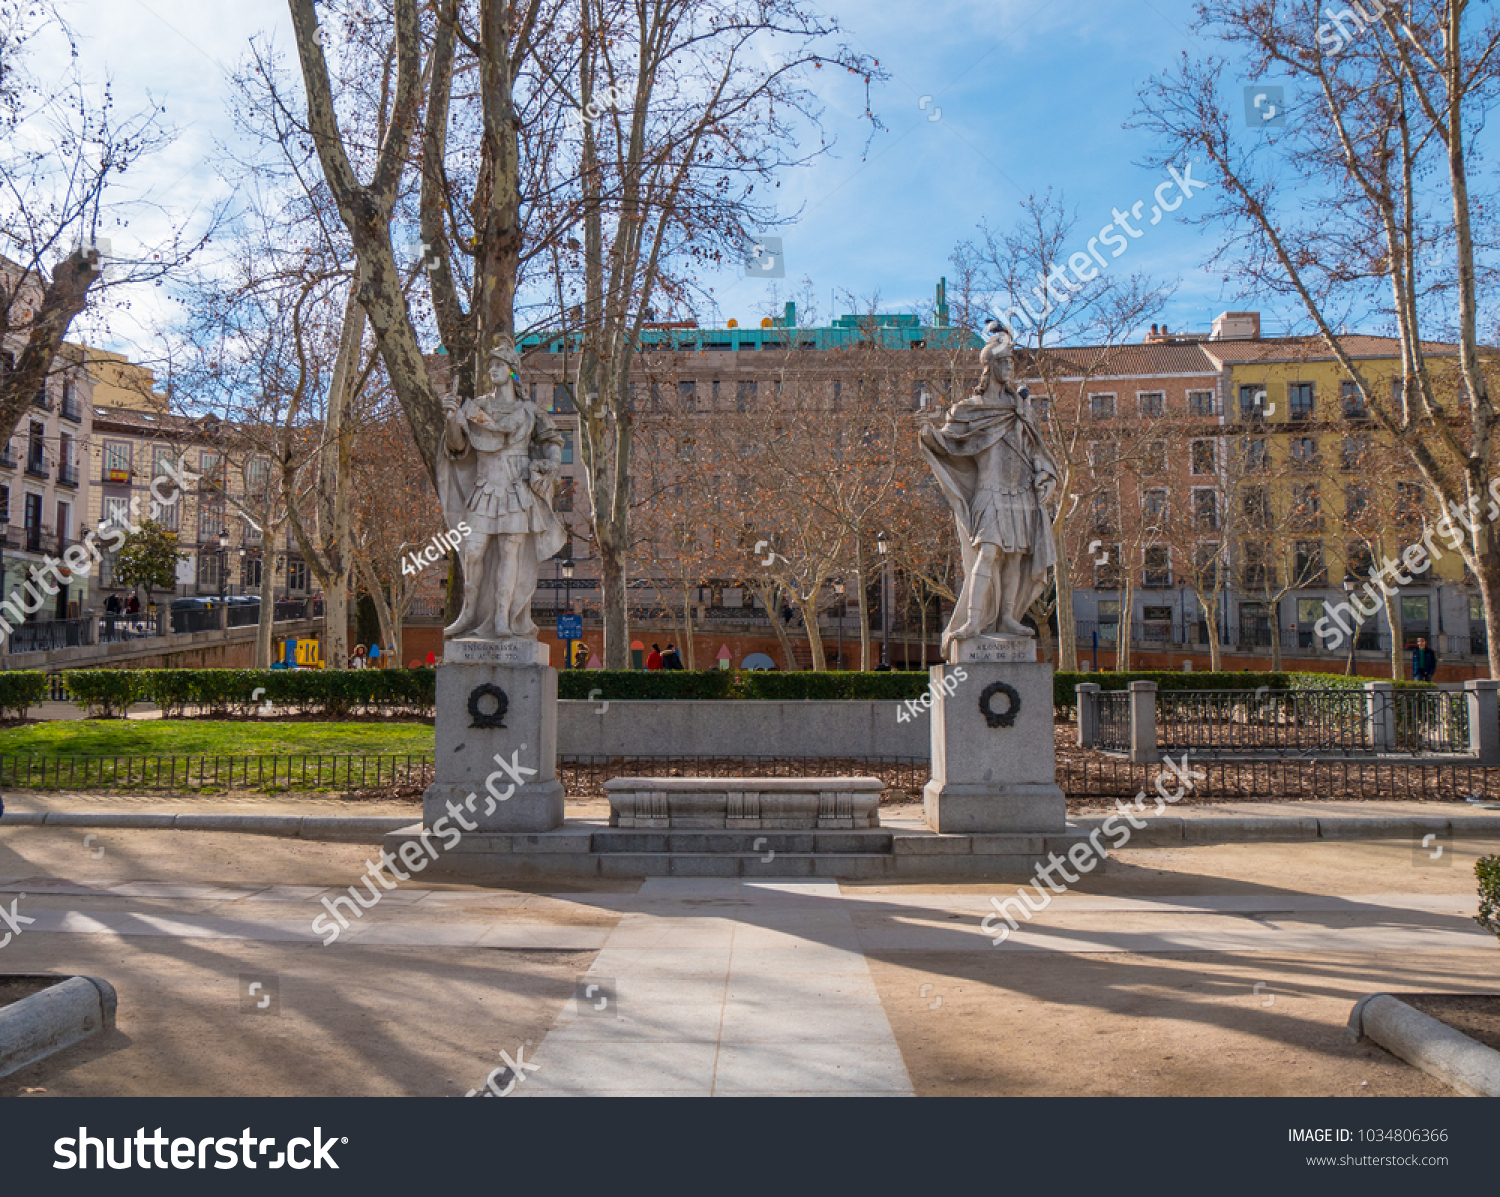 Beautiful Square in Madrid - The Plaza De Oriente at Royal Palace - MADRID / SPAIN - FEBRUAR 21, 2018 #1034806366